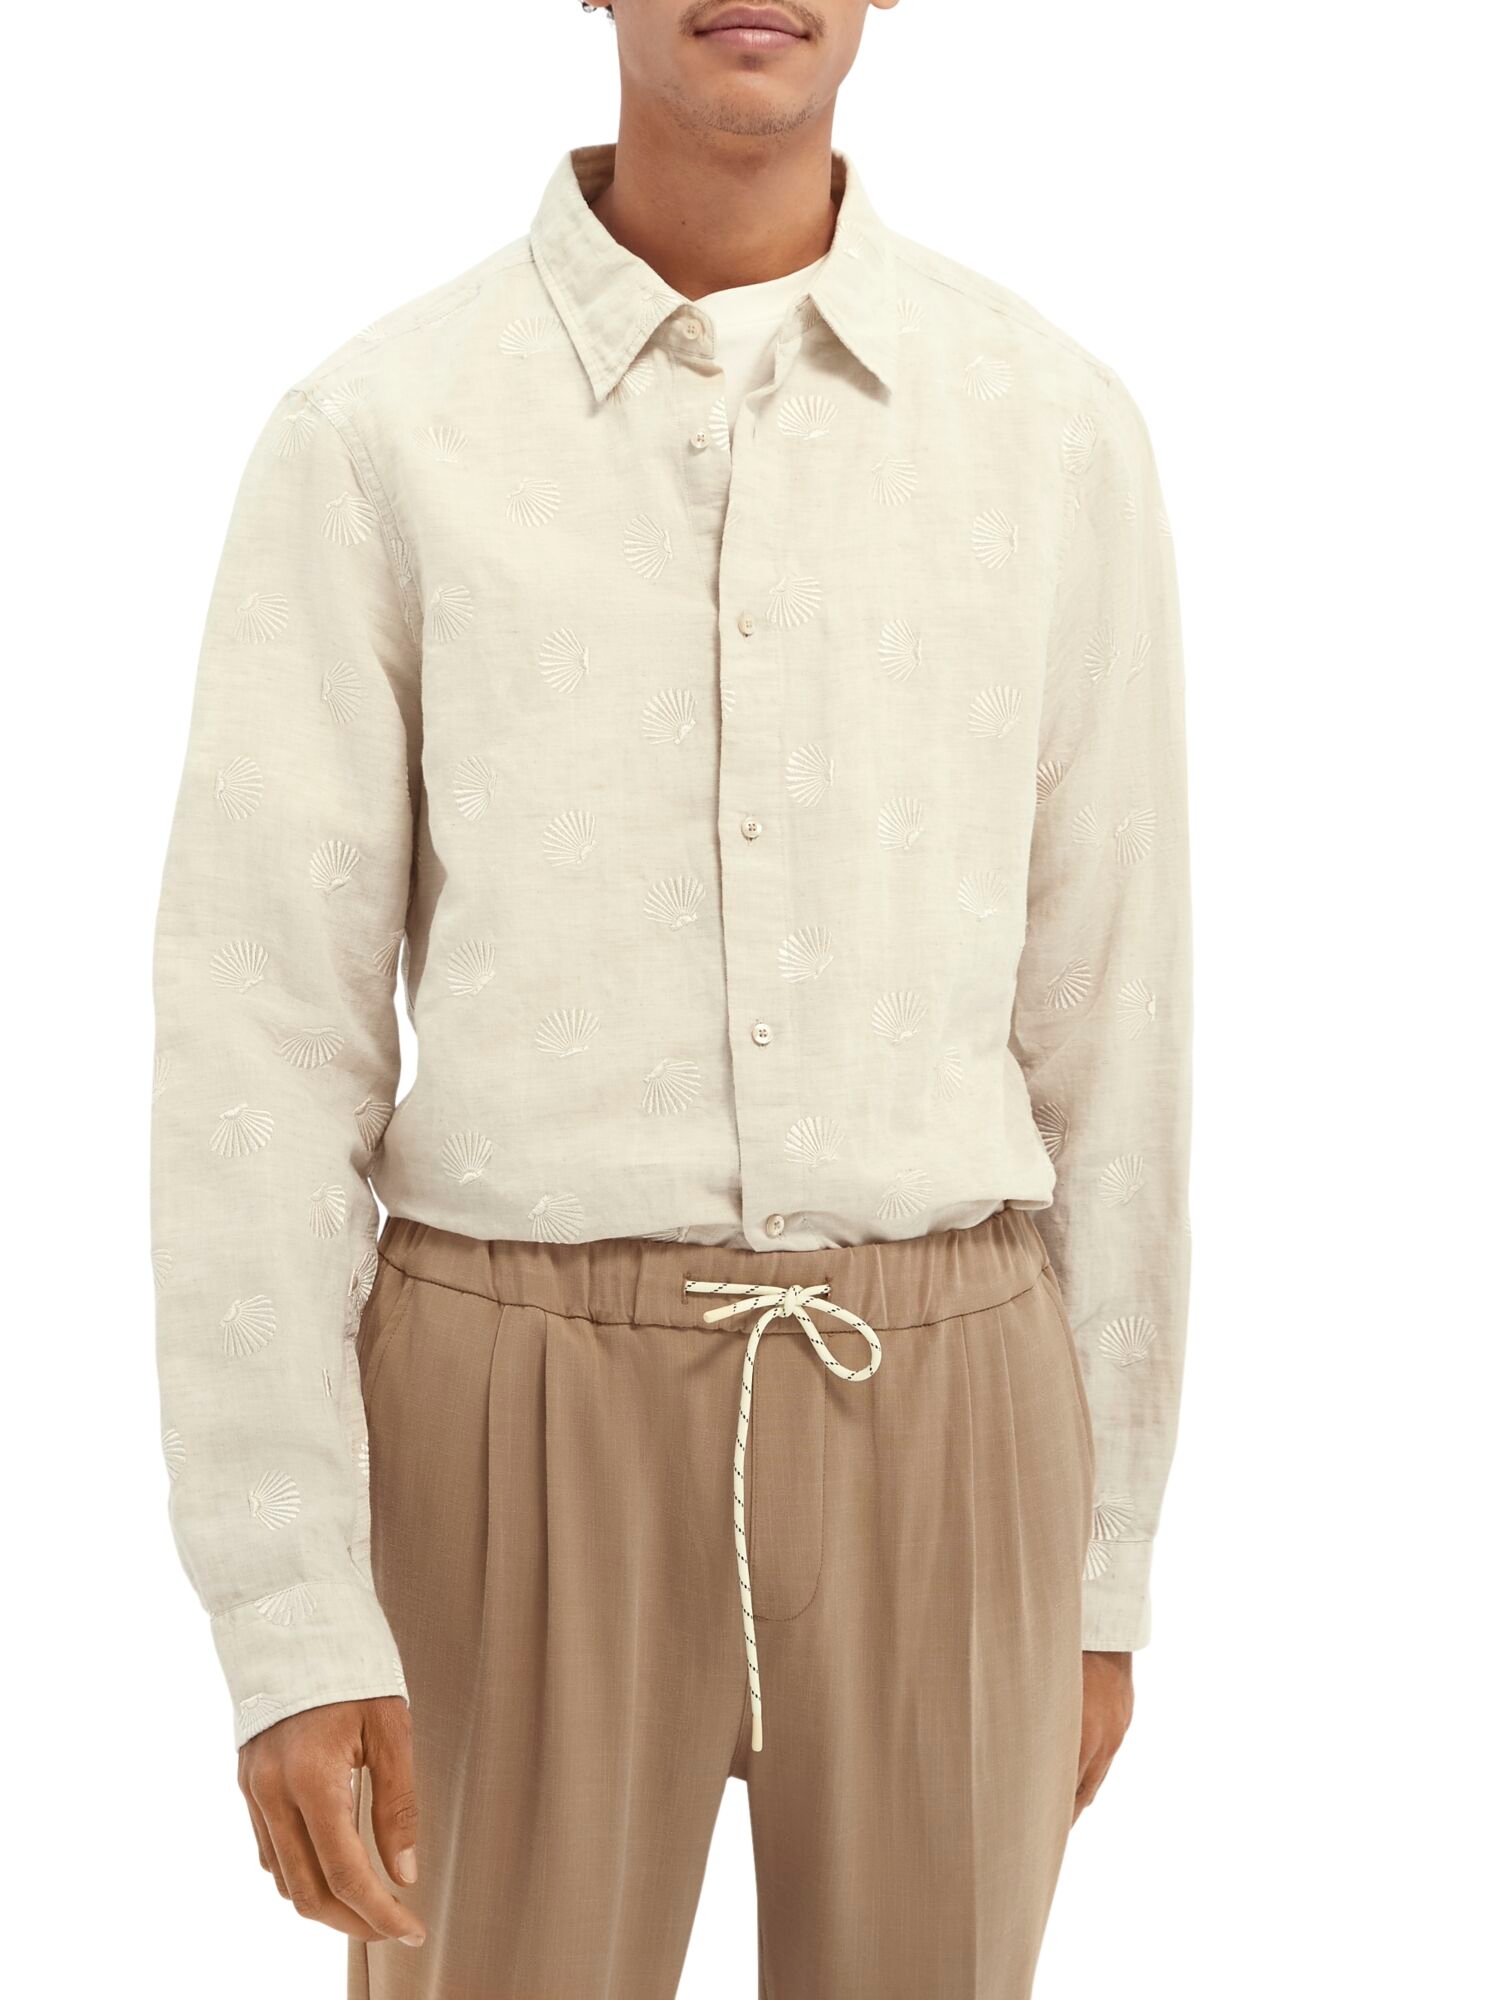 Scotch & Soda | RELAXED FIT- Embroidered organic cotton blend shirt 12